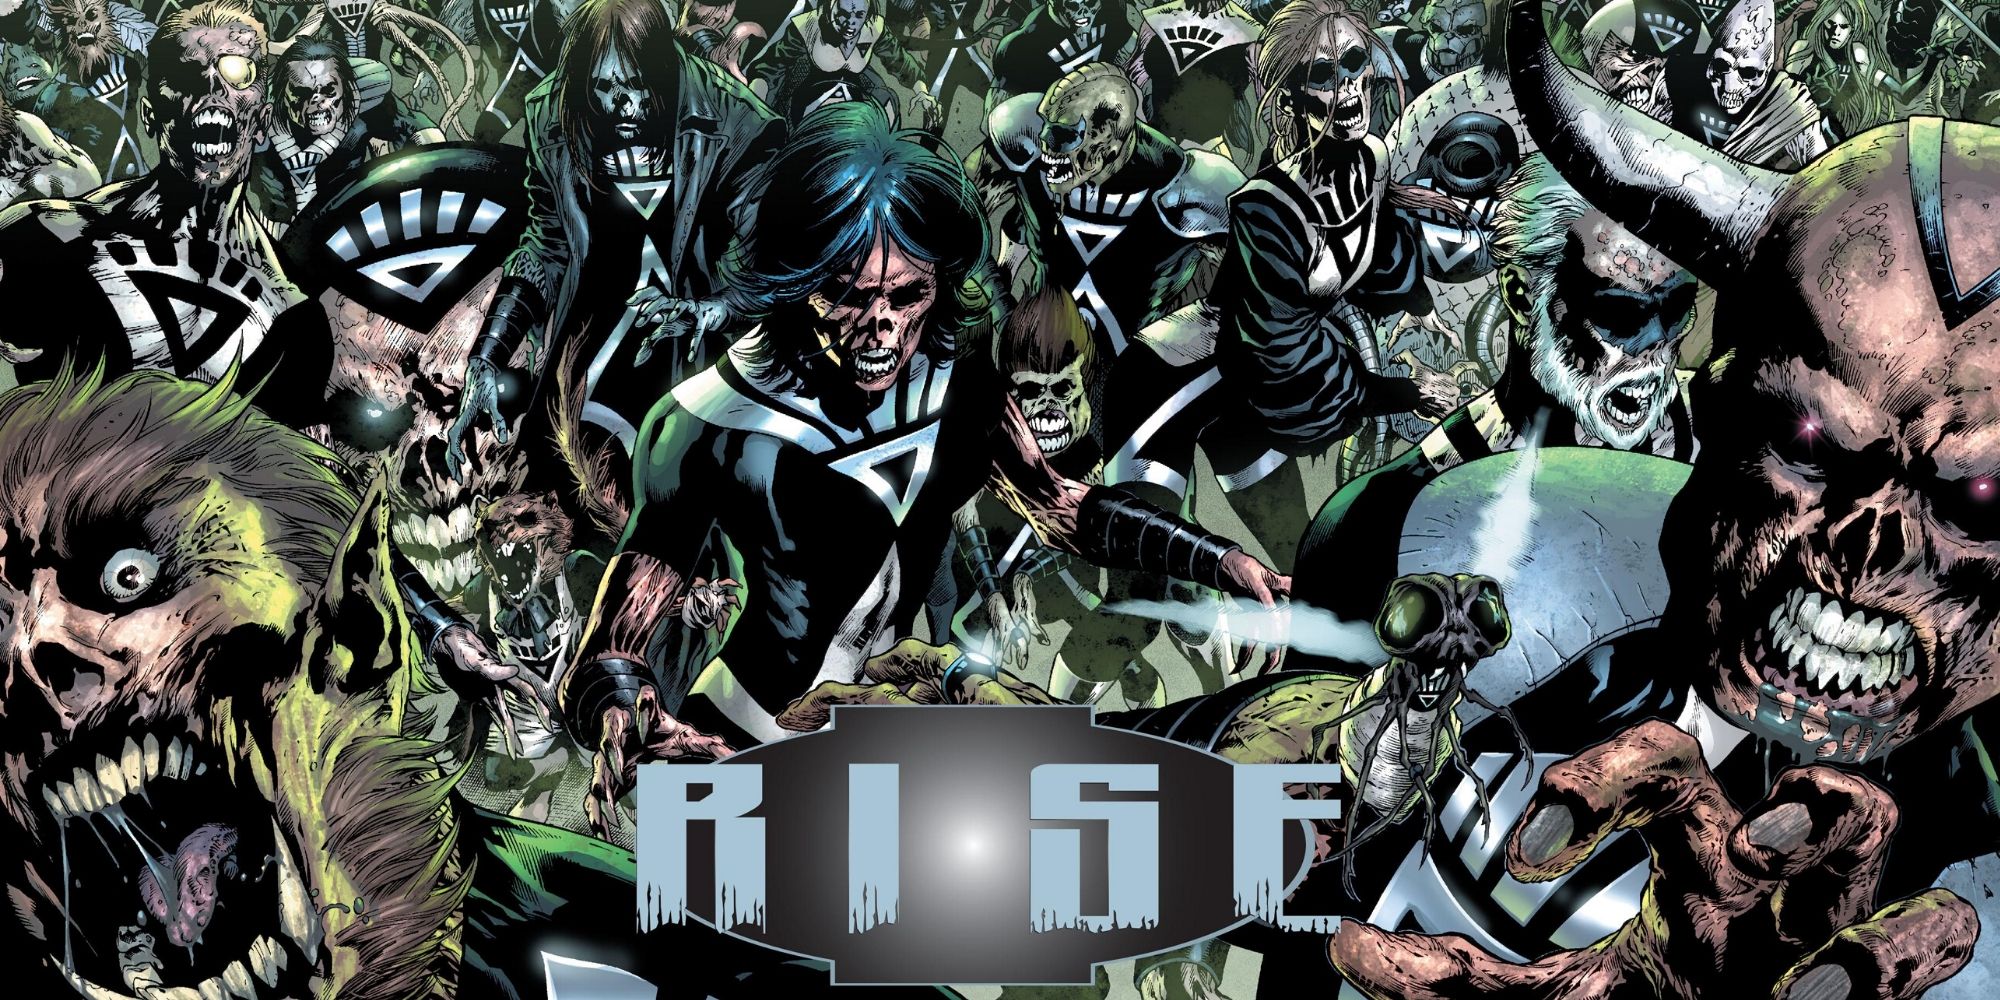 Blackest Night's zombies rising up in DC Comics